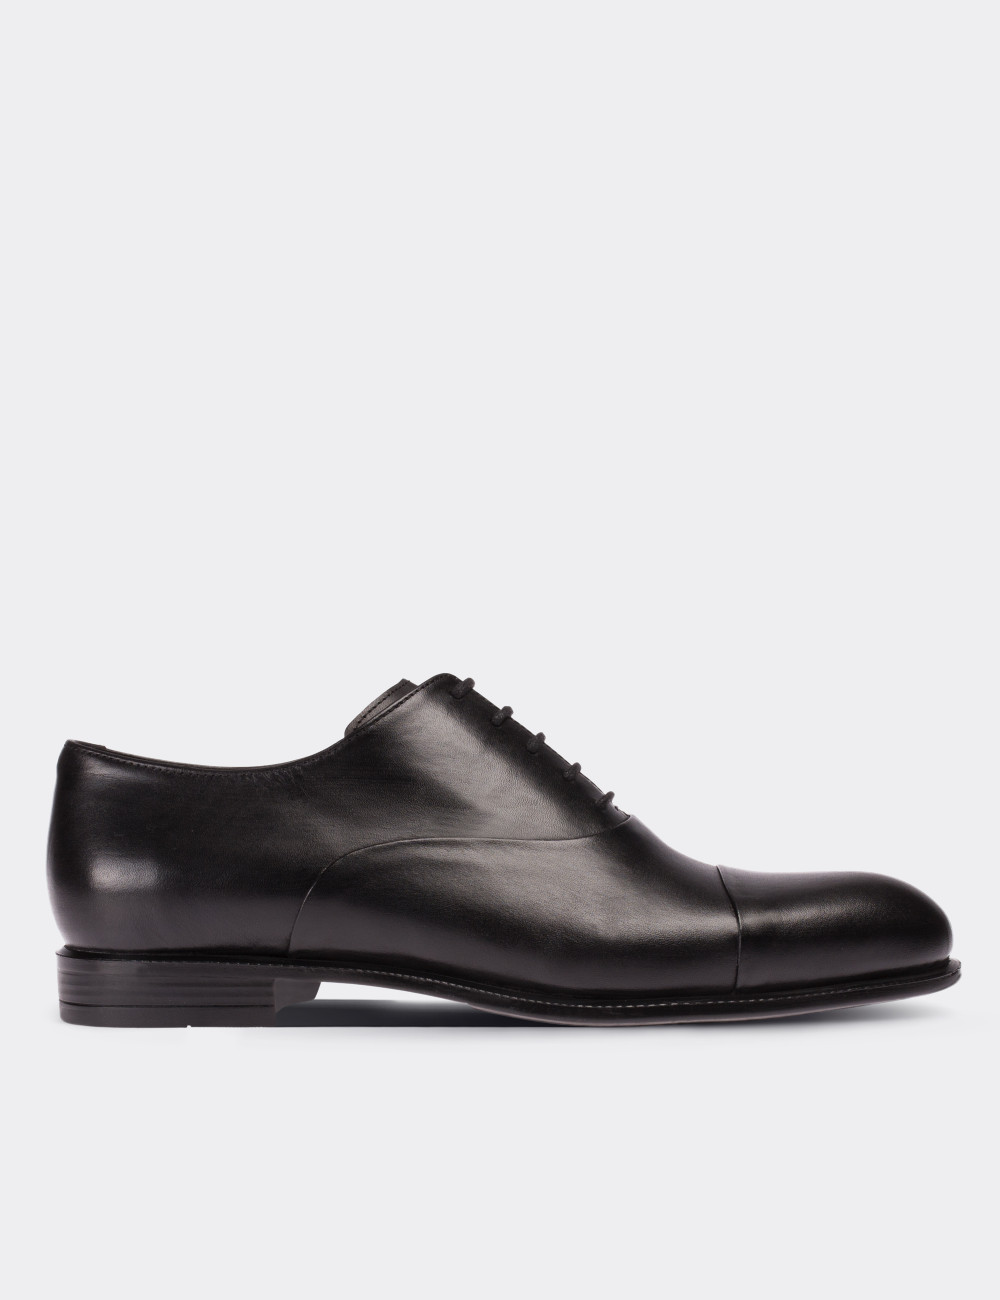 Black  Leather Classic Shoes - 01026MSYHC03